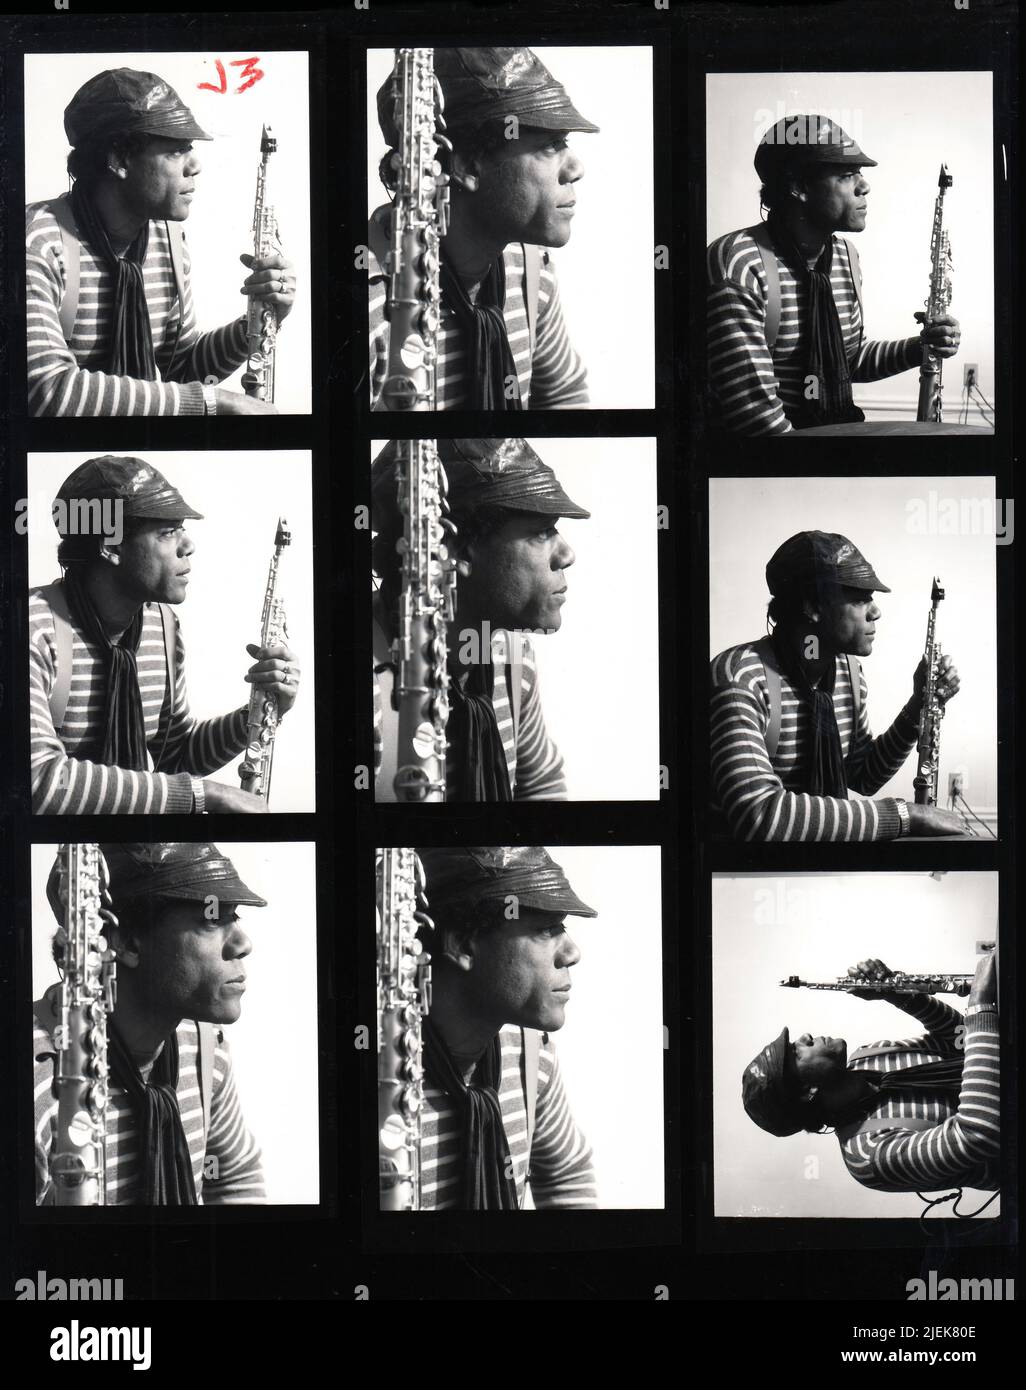 Posed portrait of avant garde jazz saxophonist JULIUS HEMPHILL in a studio in Brooklyn, New York in 1983. A contact sheet of 12 images, Stock Photo